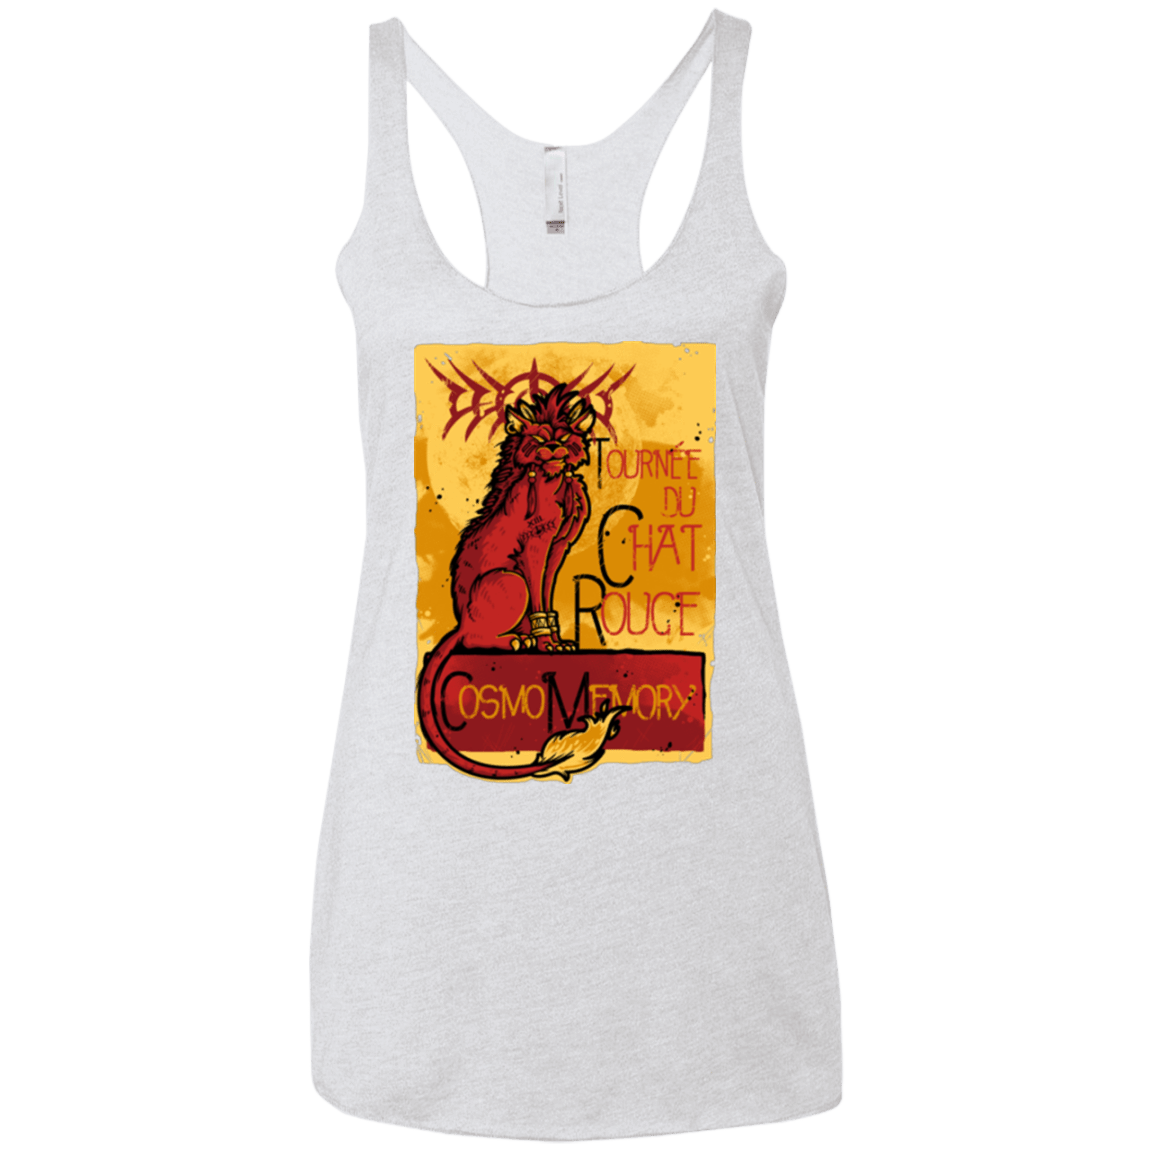 T-Shirts Heather White / X-Small LE CHAT ROUGE Women's Triblend Racerback Tank